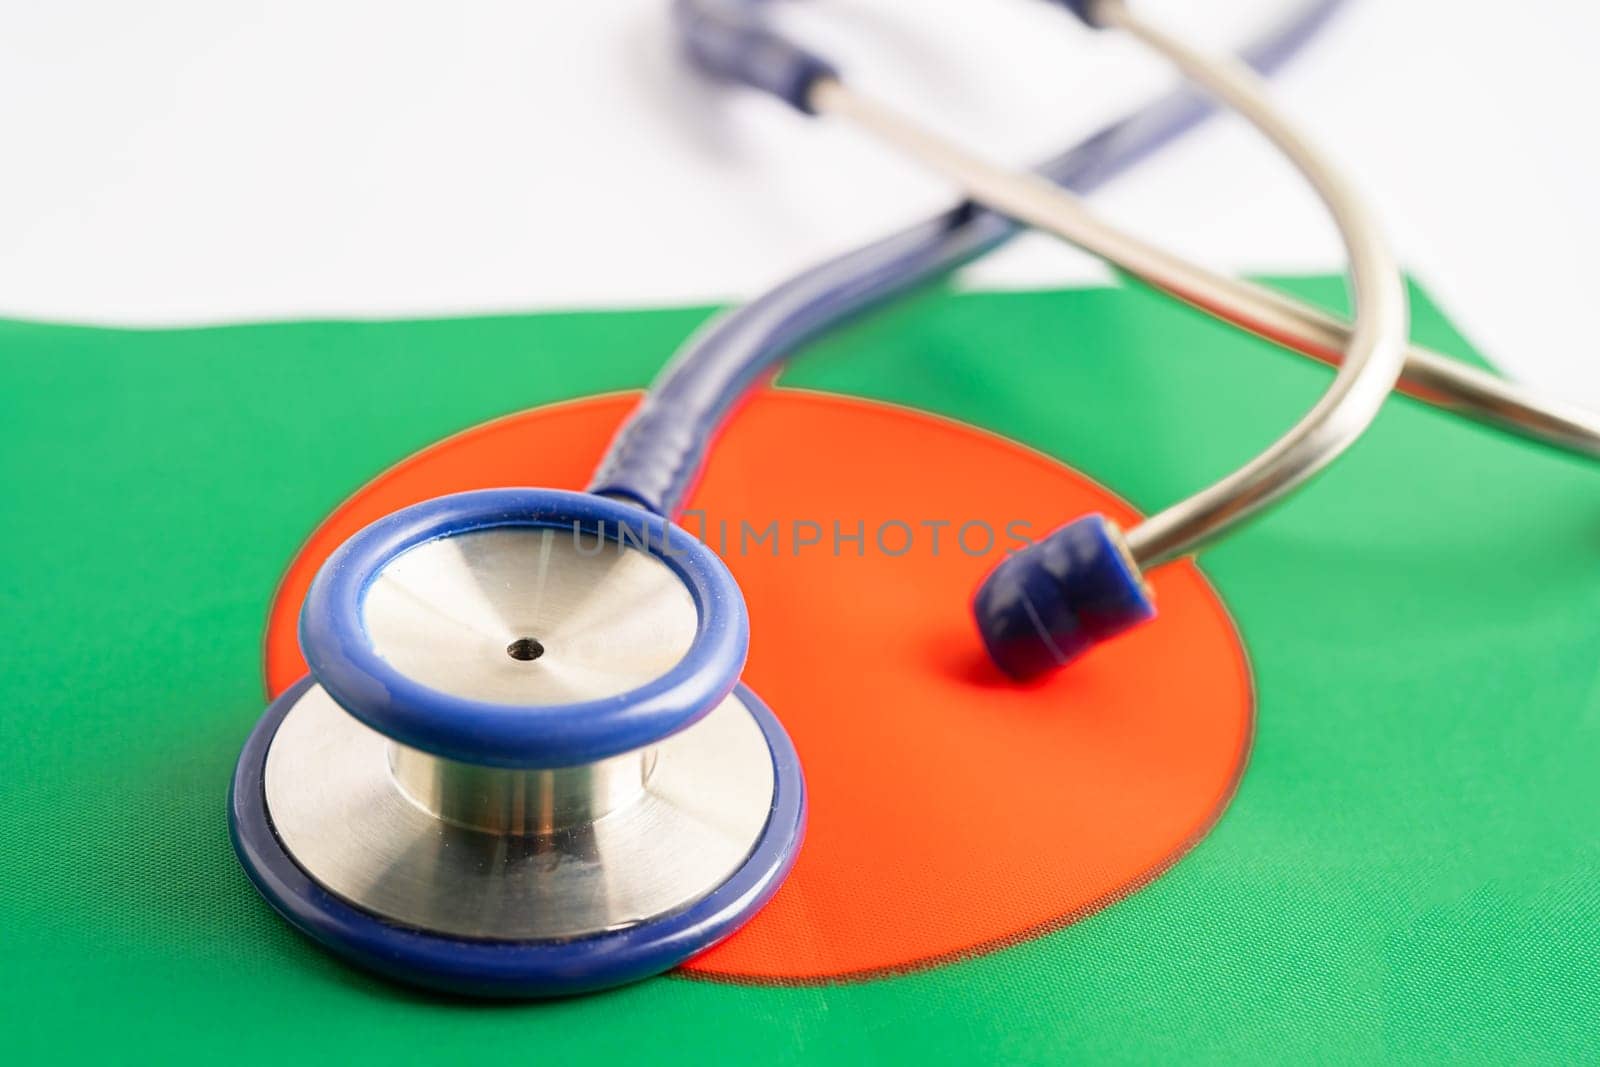 Stethoscope on Bangladesh flag background, Business and finance concept.   by pamai